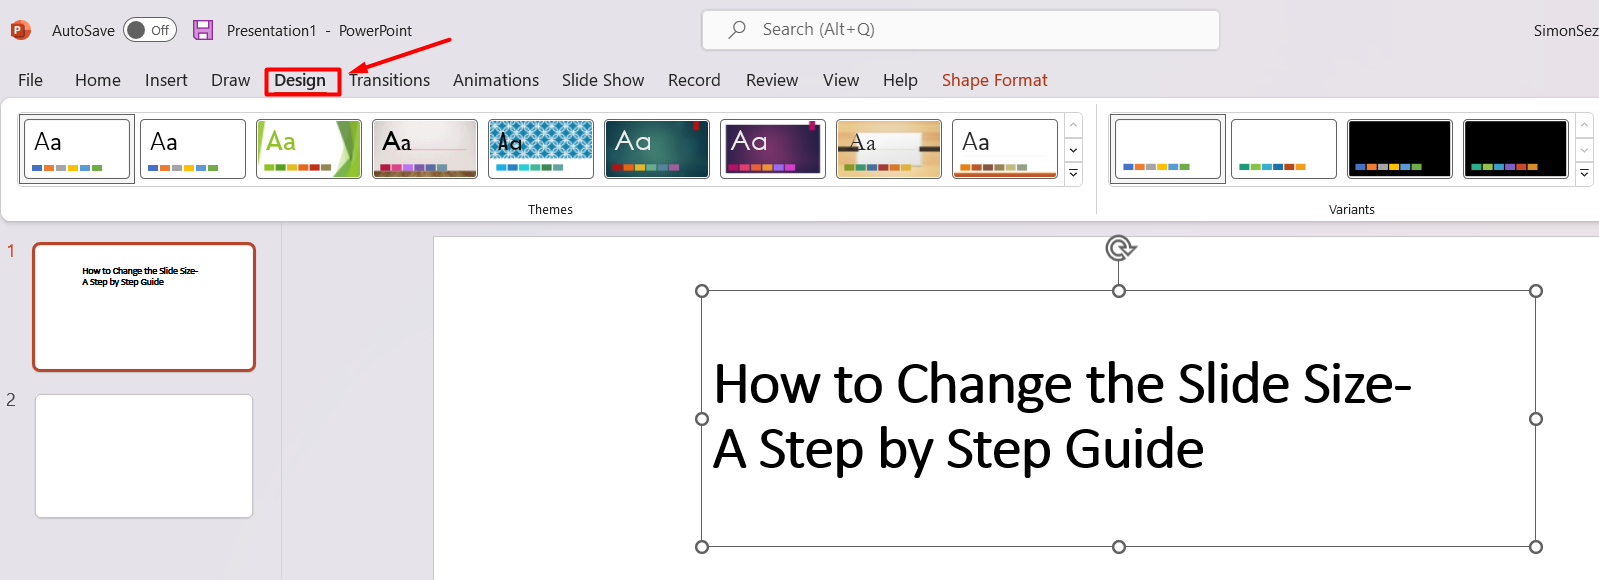 How to change slide size in PowerPoint -Choose the Design tab